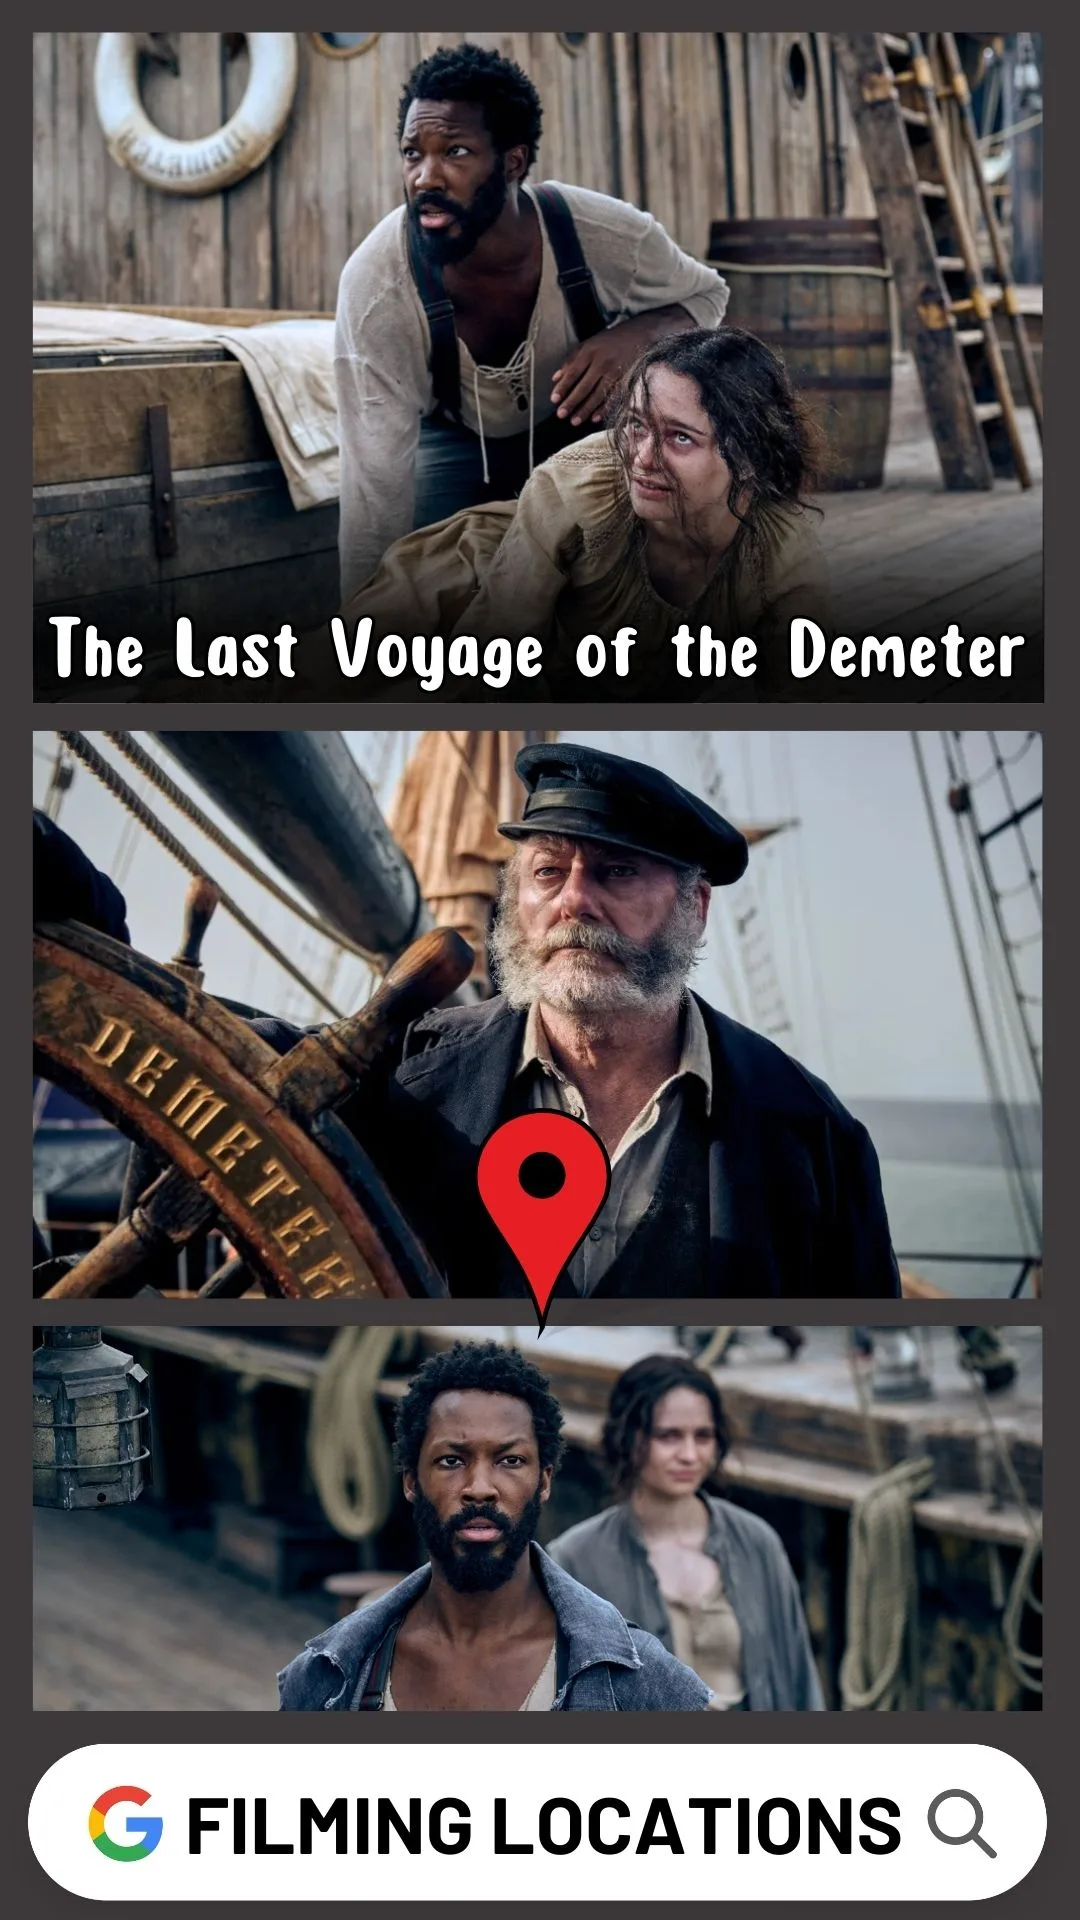 The Last Voyage of the Demeter Filming Locations